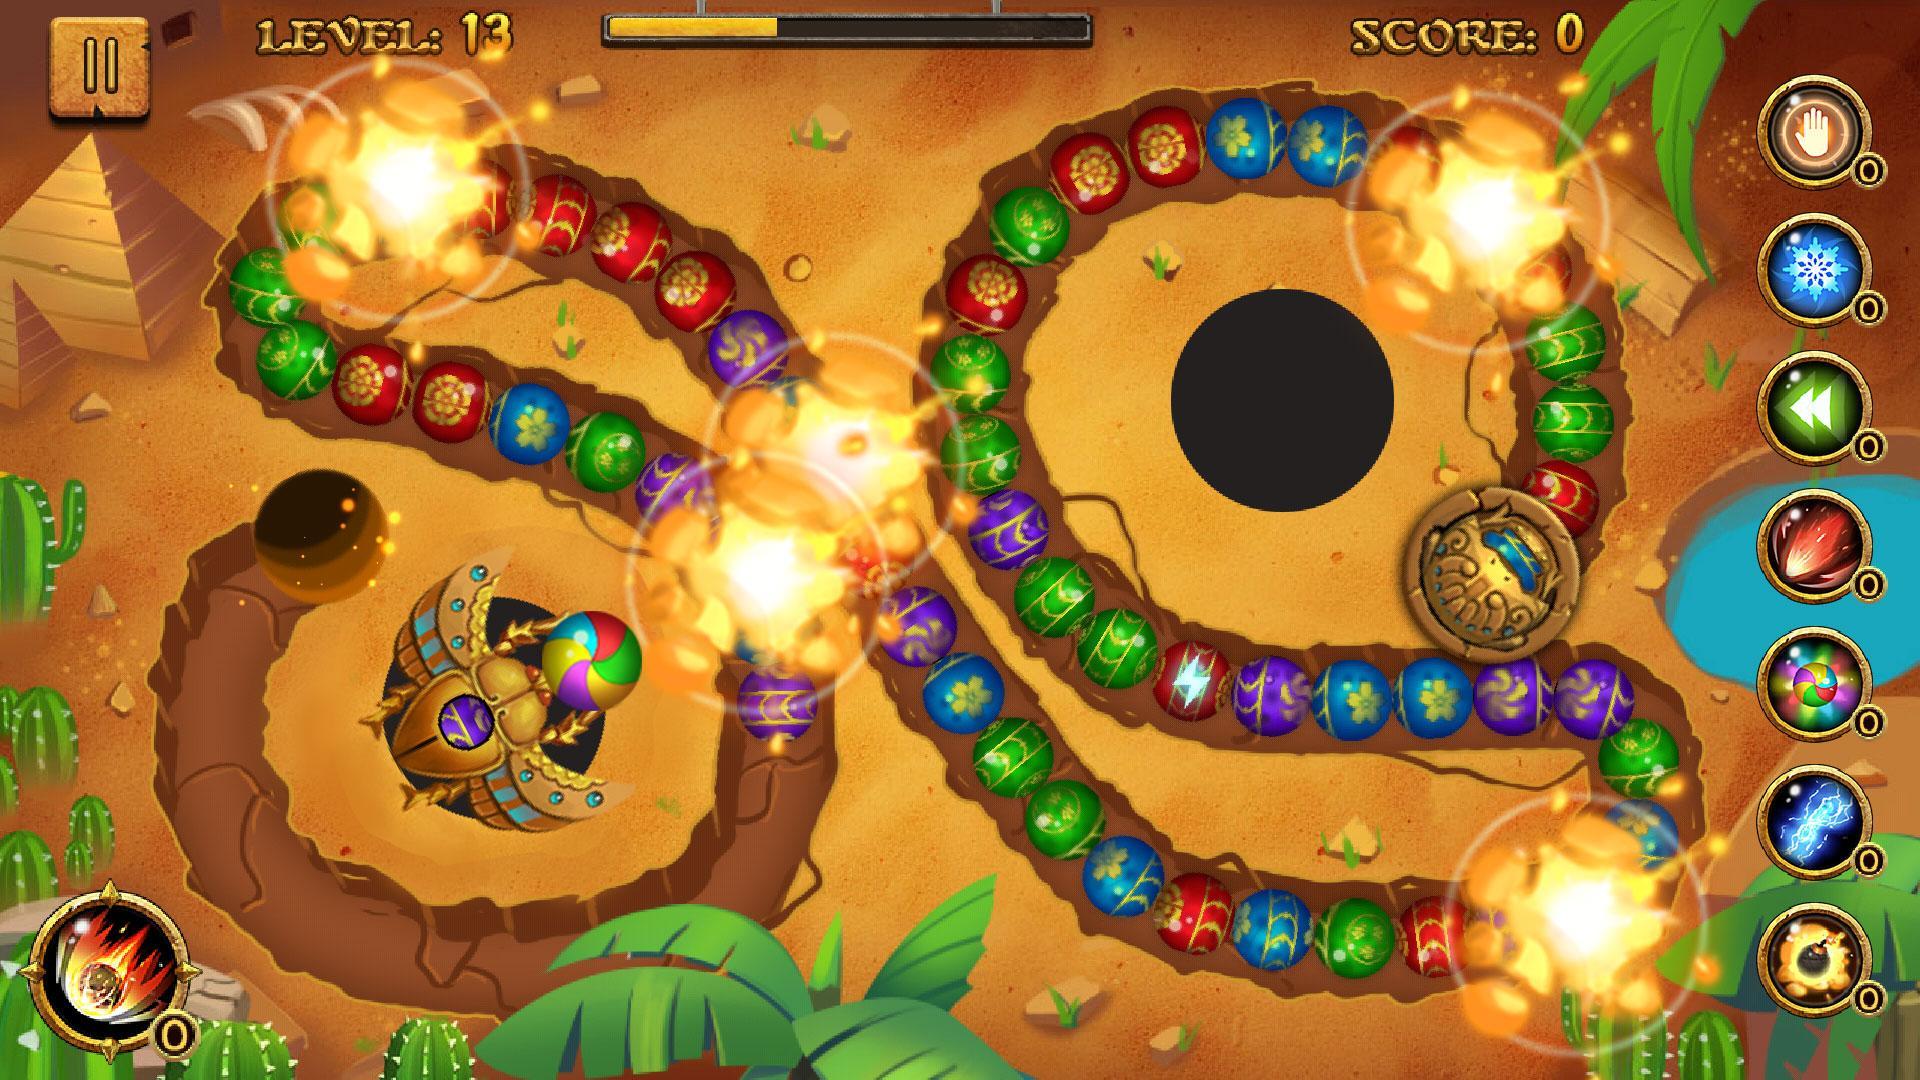 Jungle Marble Blast for Android - APK Download